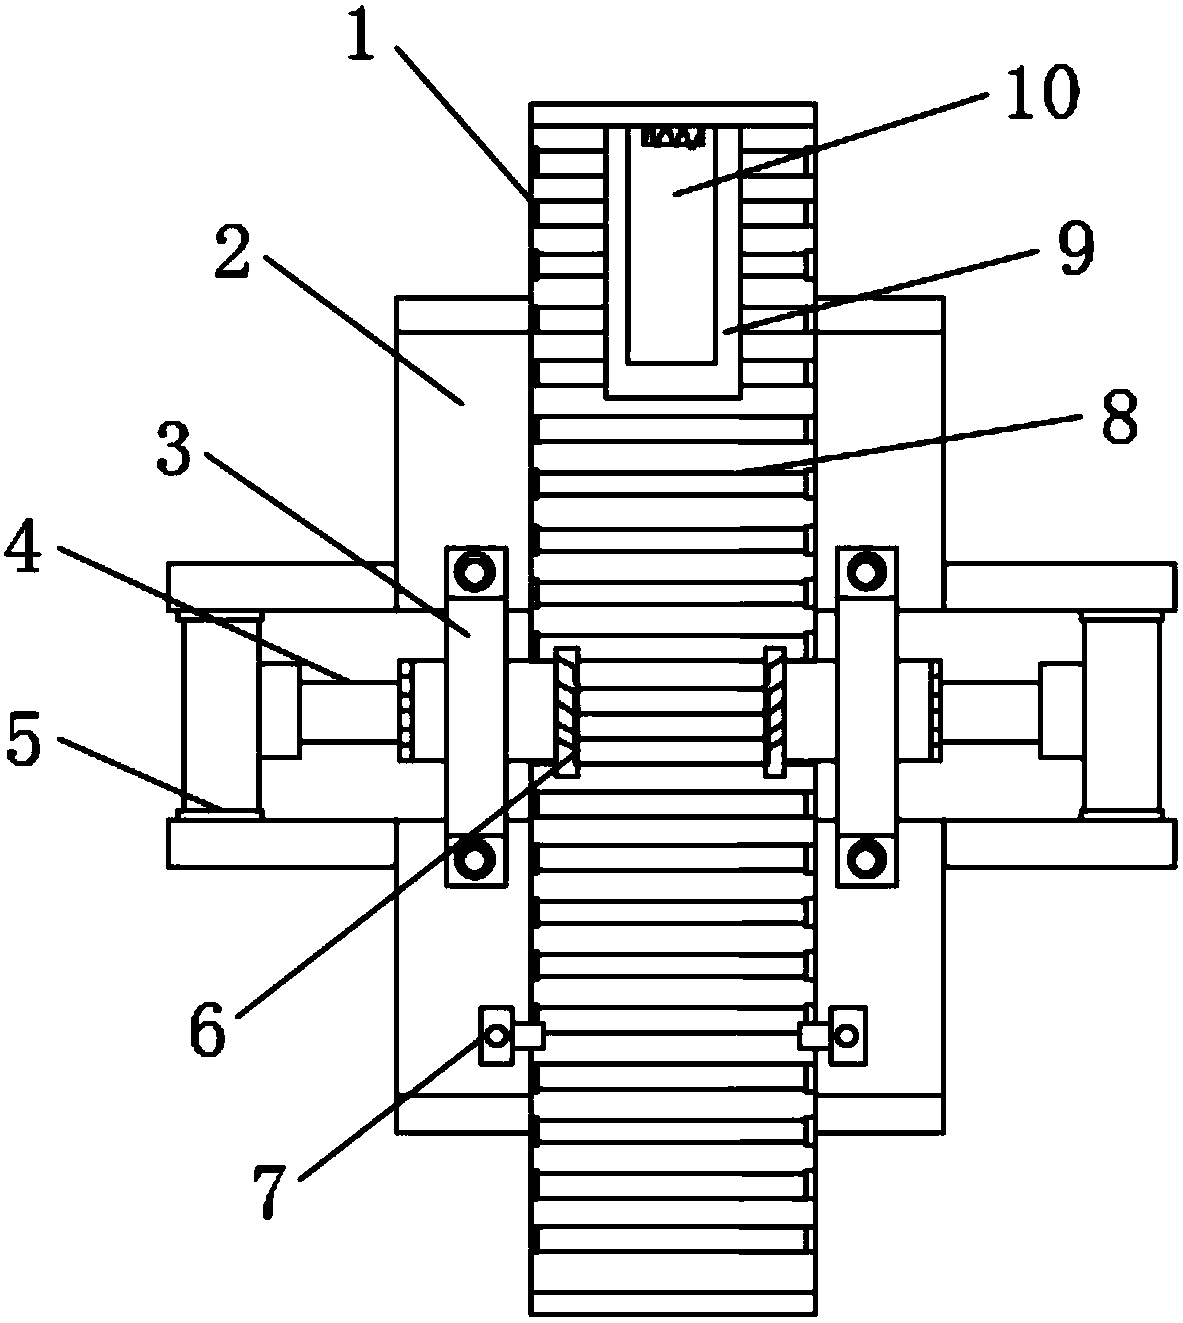 Material clamping mechanism used for groover